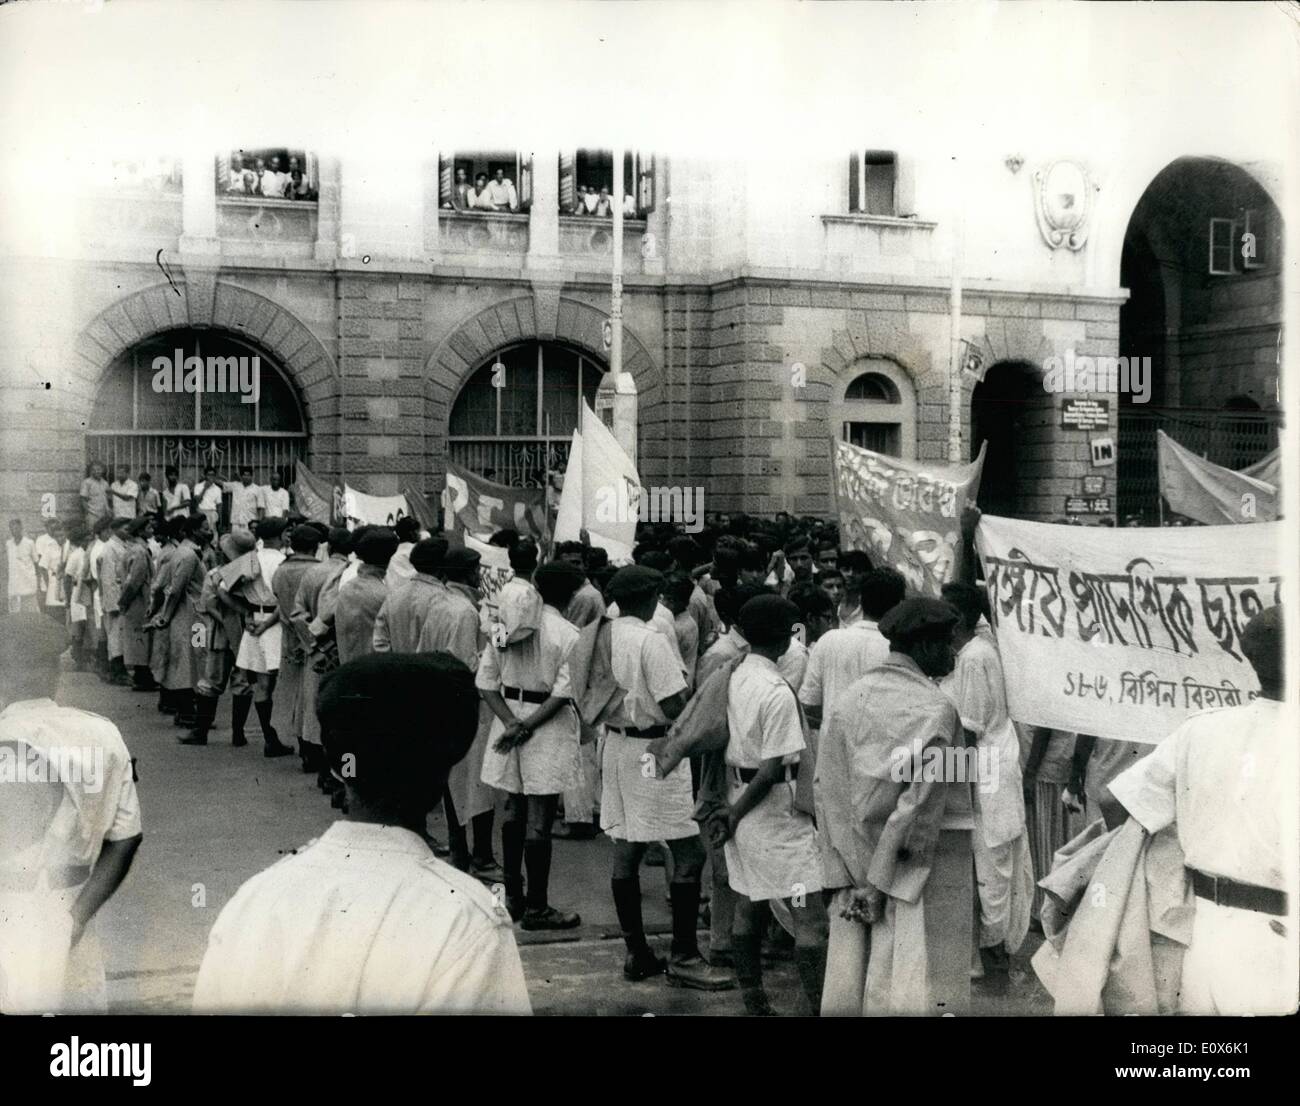 Aug. 08, 1965 - Student Demonstration In Calcutta. Schoolboys and college students in Calcutta, launched a massive demonstration to protest against the rise in the city's tram fares which became effective on July 27. Led by Communists and seven other Leftist parties, the students during the first two days of the demonstration (July 27-28), boycotted classes and squatted on tram tracks thus obstructing the movement of the vehicles. Photo Shows:- A massive procession of students demonstrating, was stopped by the police near the Governor's residence in Central Calcutta Stock Photo